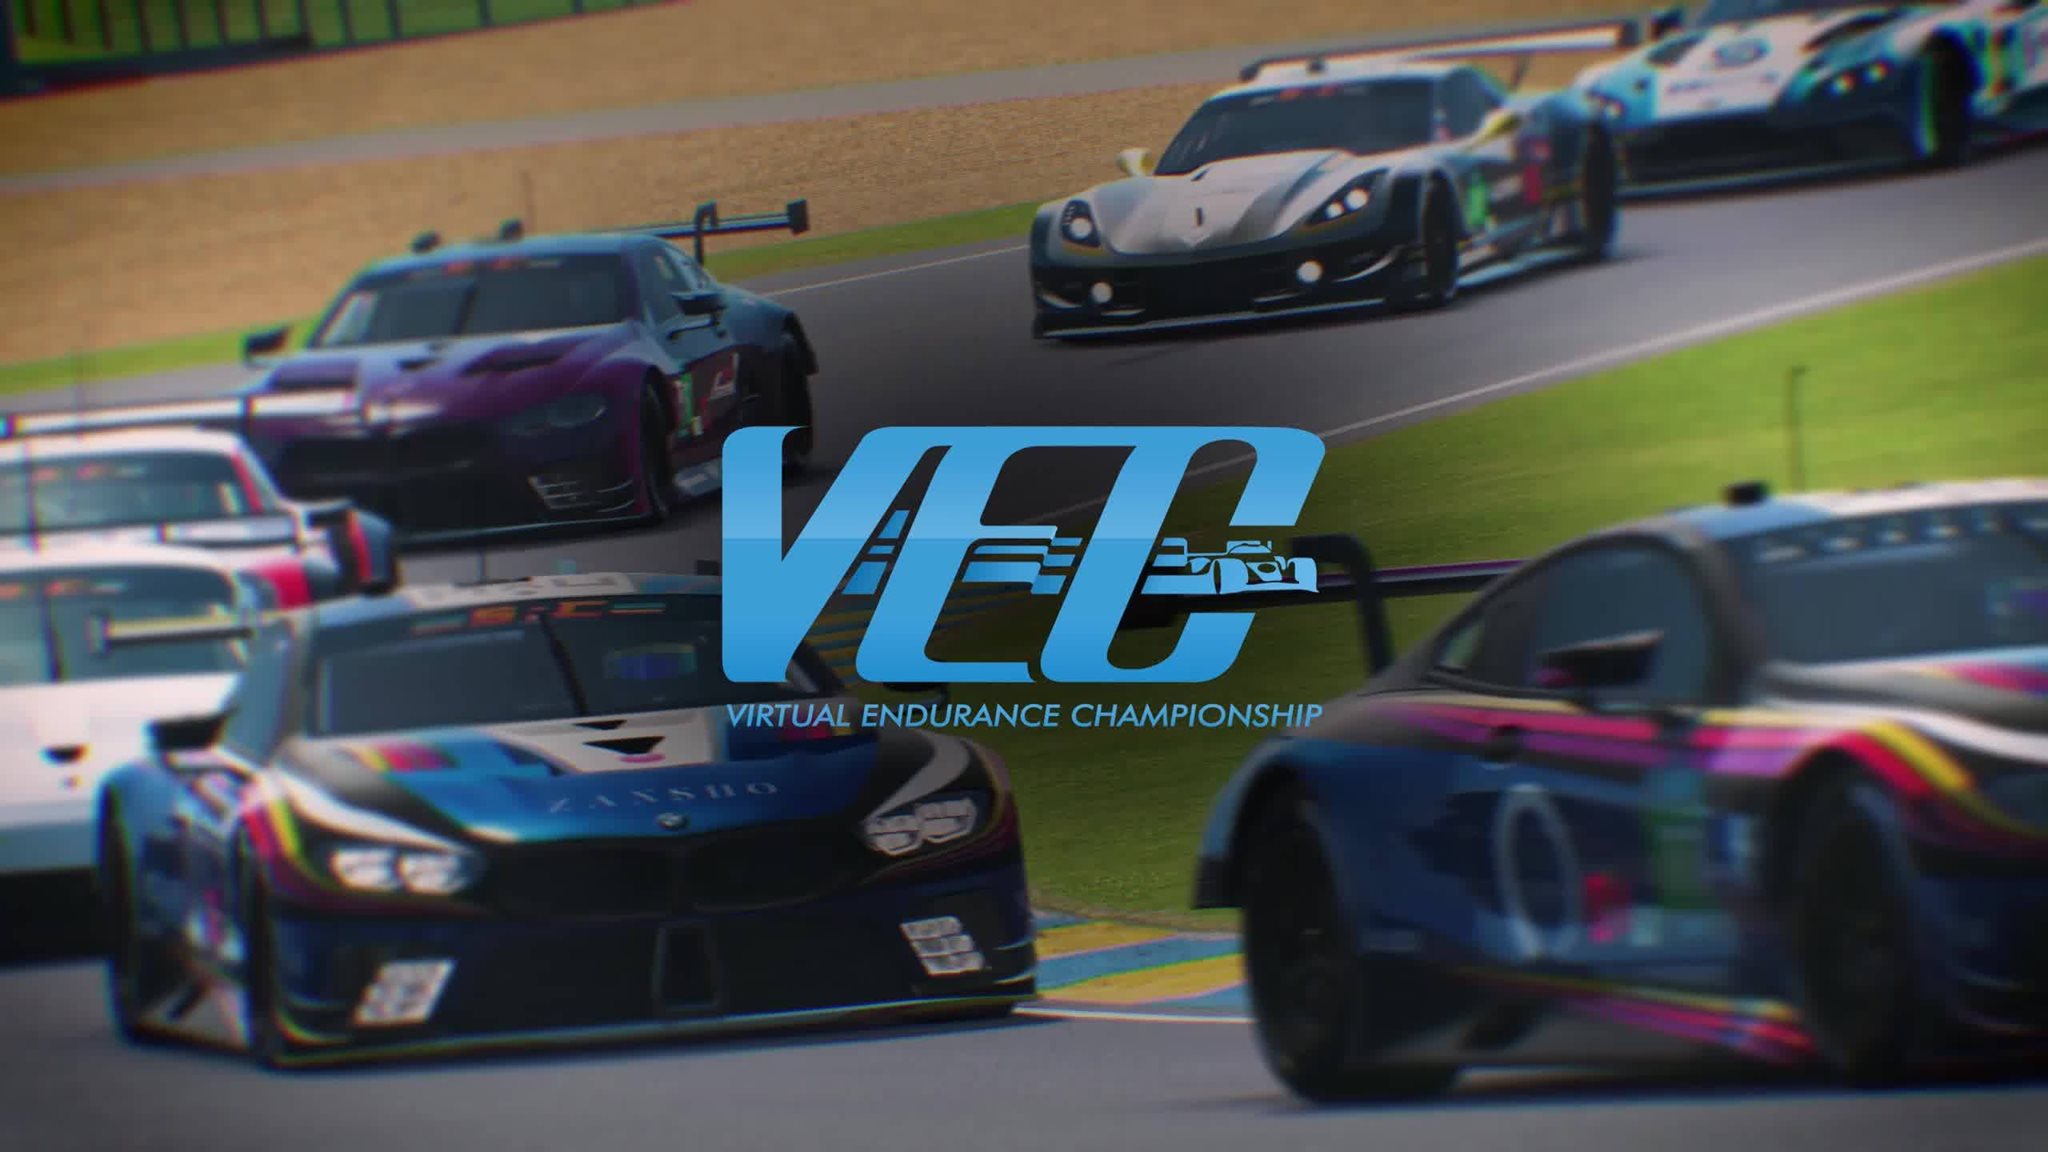 More information about "rFactor 2 Virtual Endurance Championship: Le Mans 24 Hours [5 Giugno ore 14,30]"